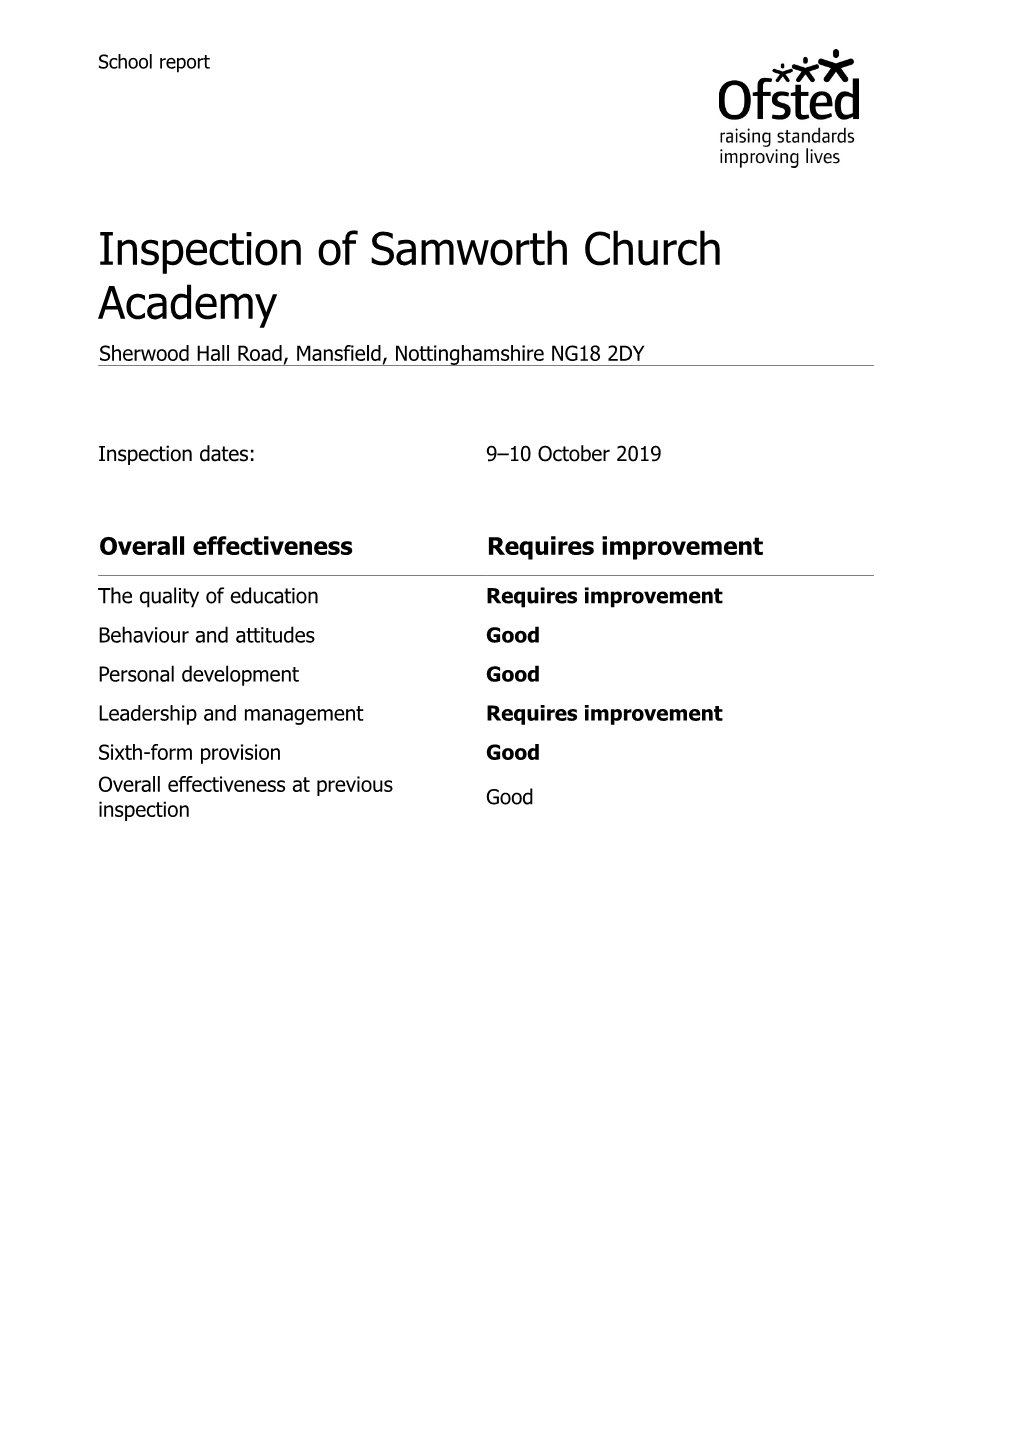 Inspection of Samworth Church Academy Sherwood Hall Road, Mansfield, Nottinghamshire NG18 2DY